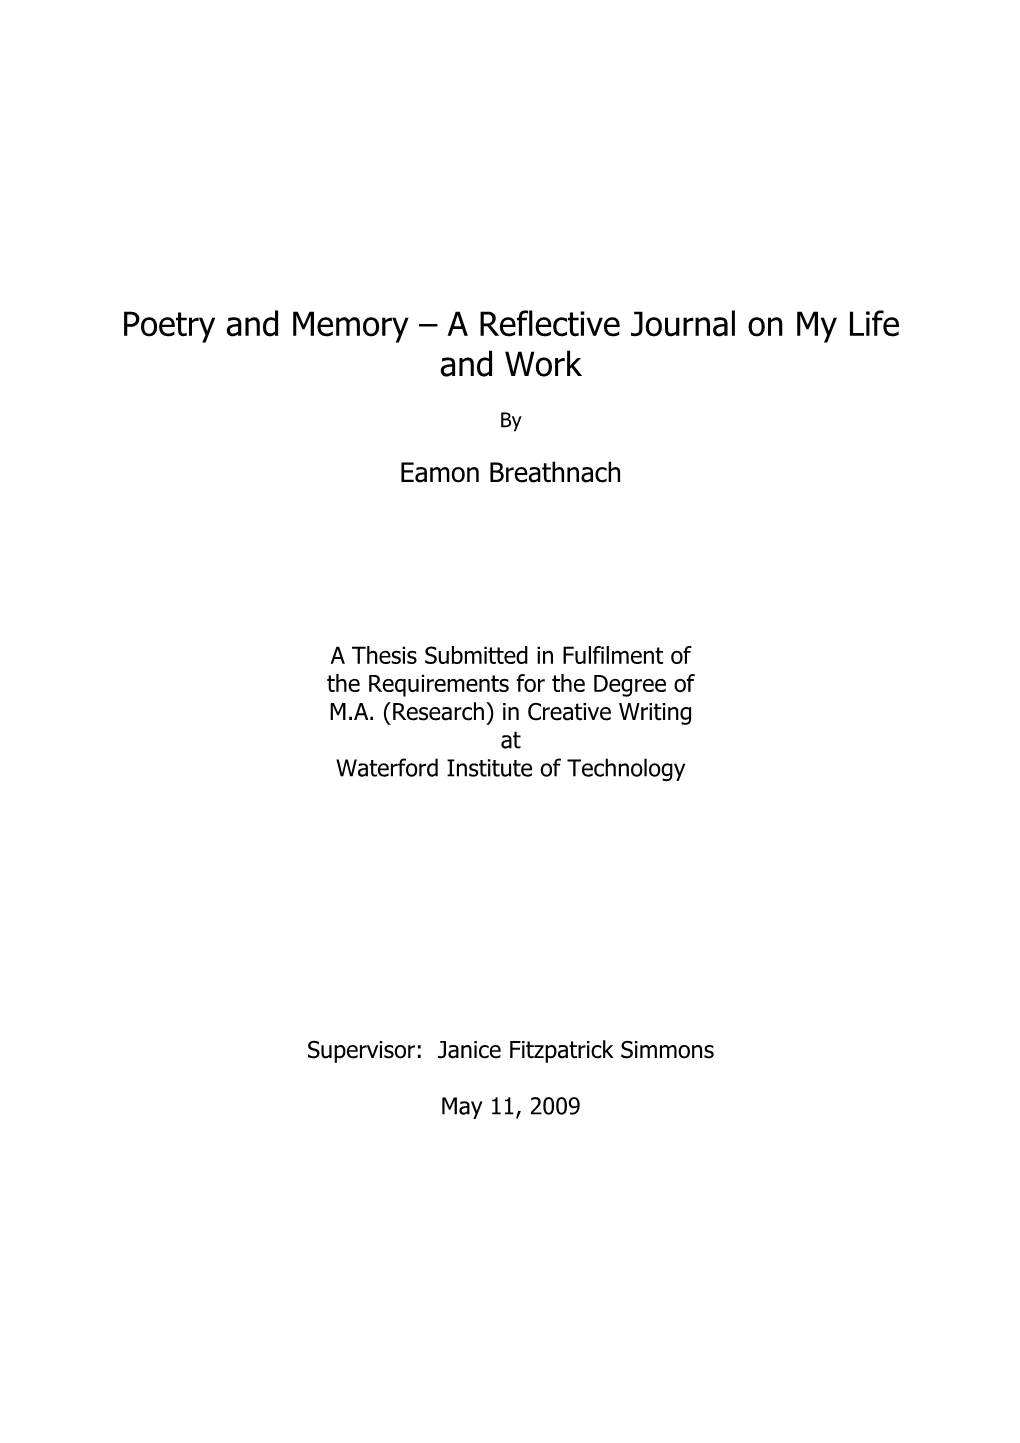 Poetry and Memory – a Reflective Journal on My Life and Work